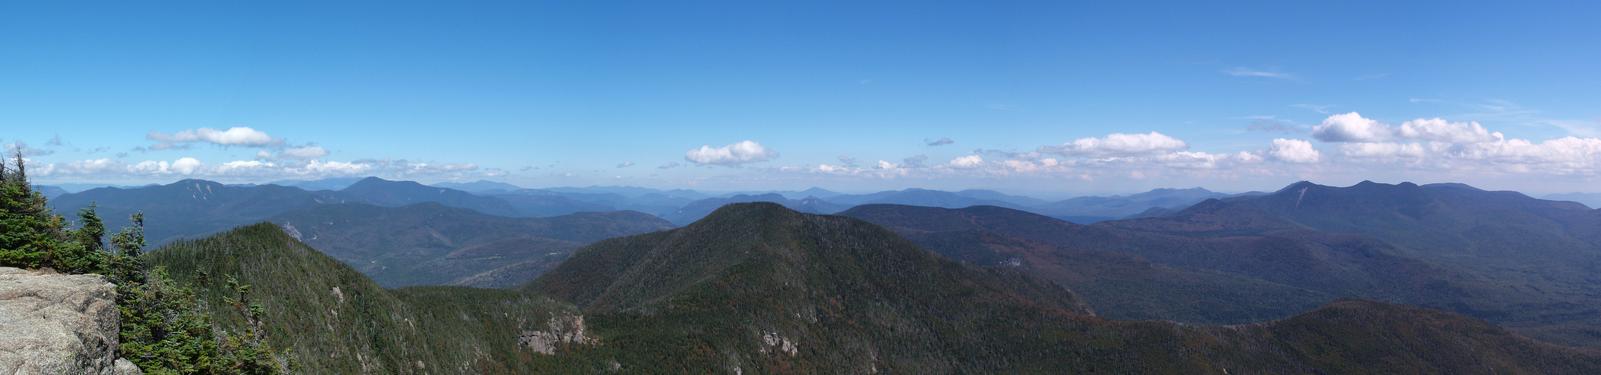 A view of the White Mountains as seen from the summit of Mount Osceola in NH on August 2006